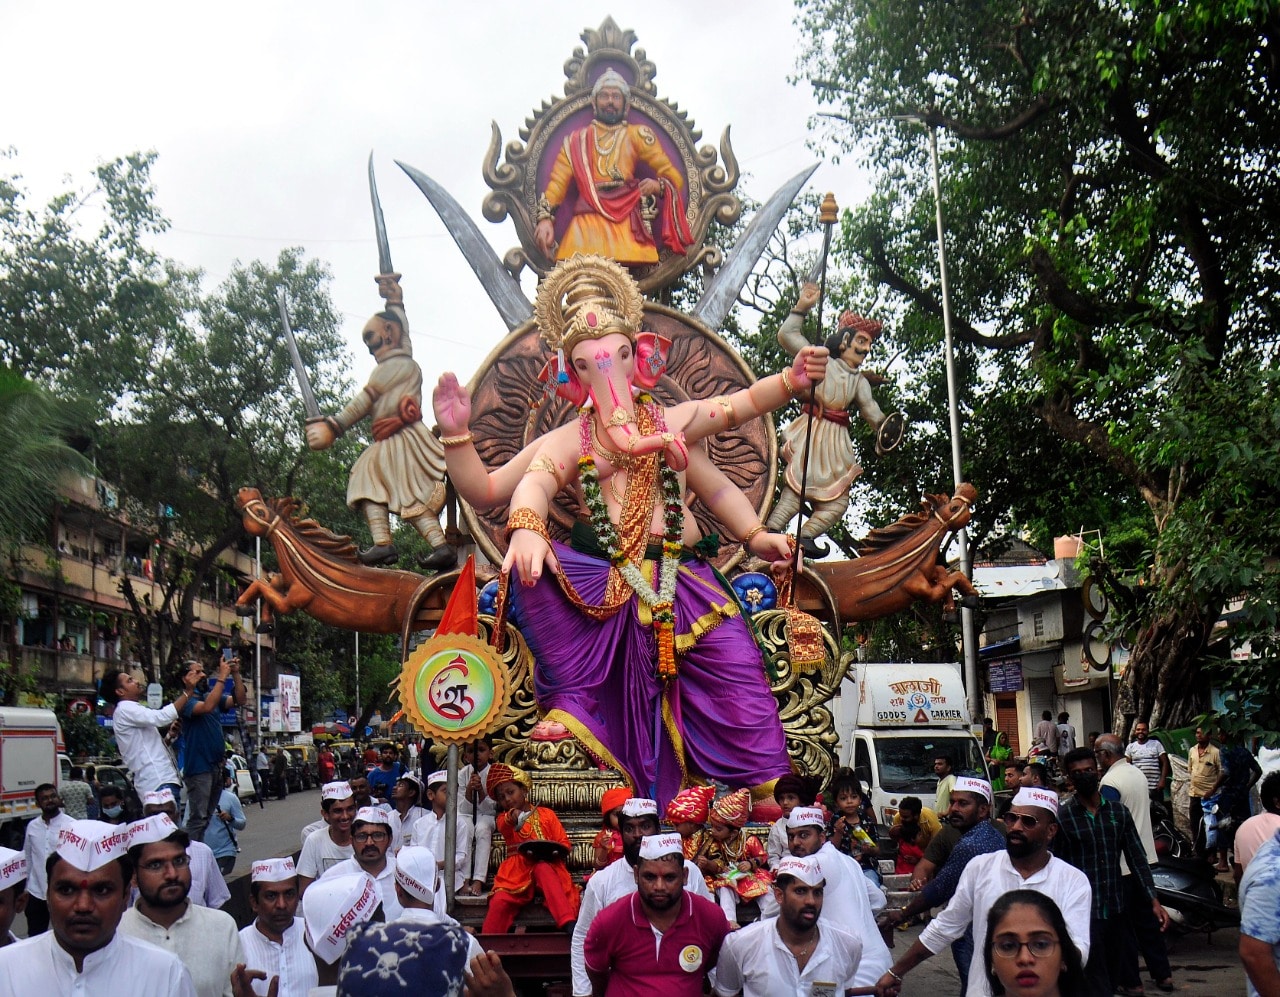 The celebrations will start on August 31 and end on Anant Chaturdashi, September 9. (Image: Sachin Gokhale/News18)